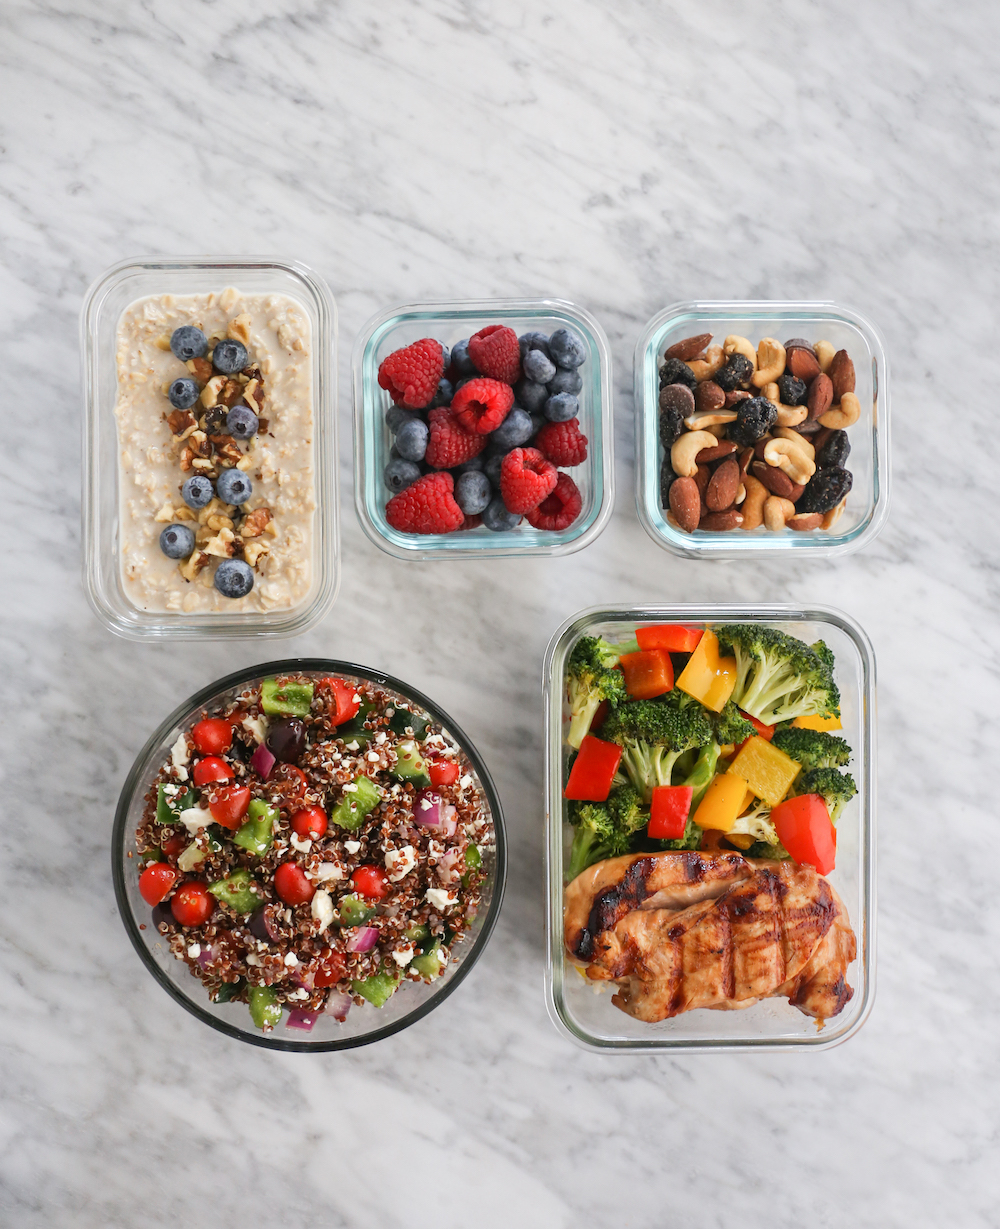 How Meal Prep Can Lead To A More Balanced & Healthy Lifestyle